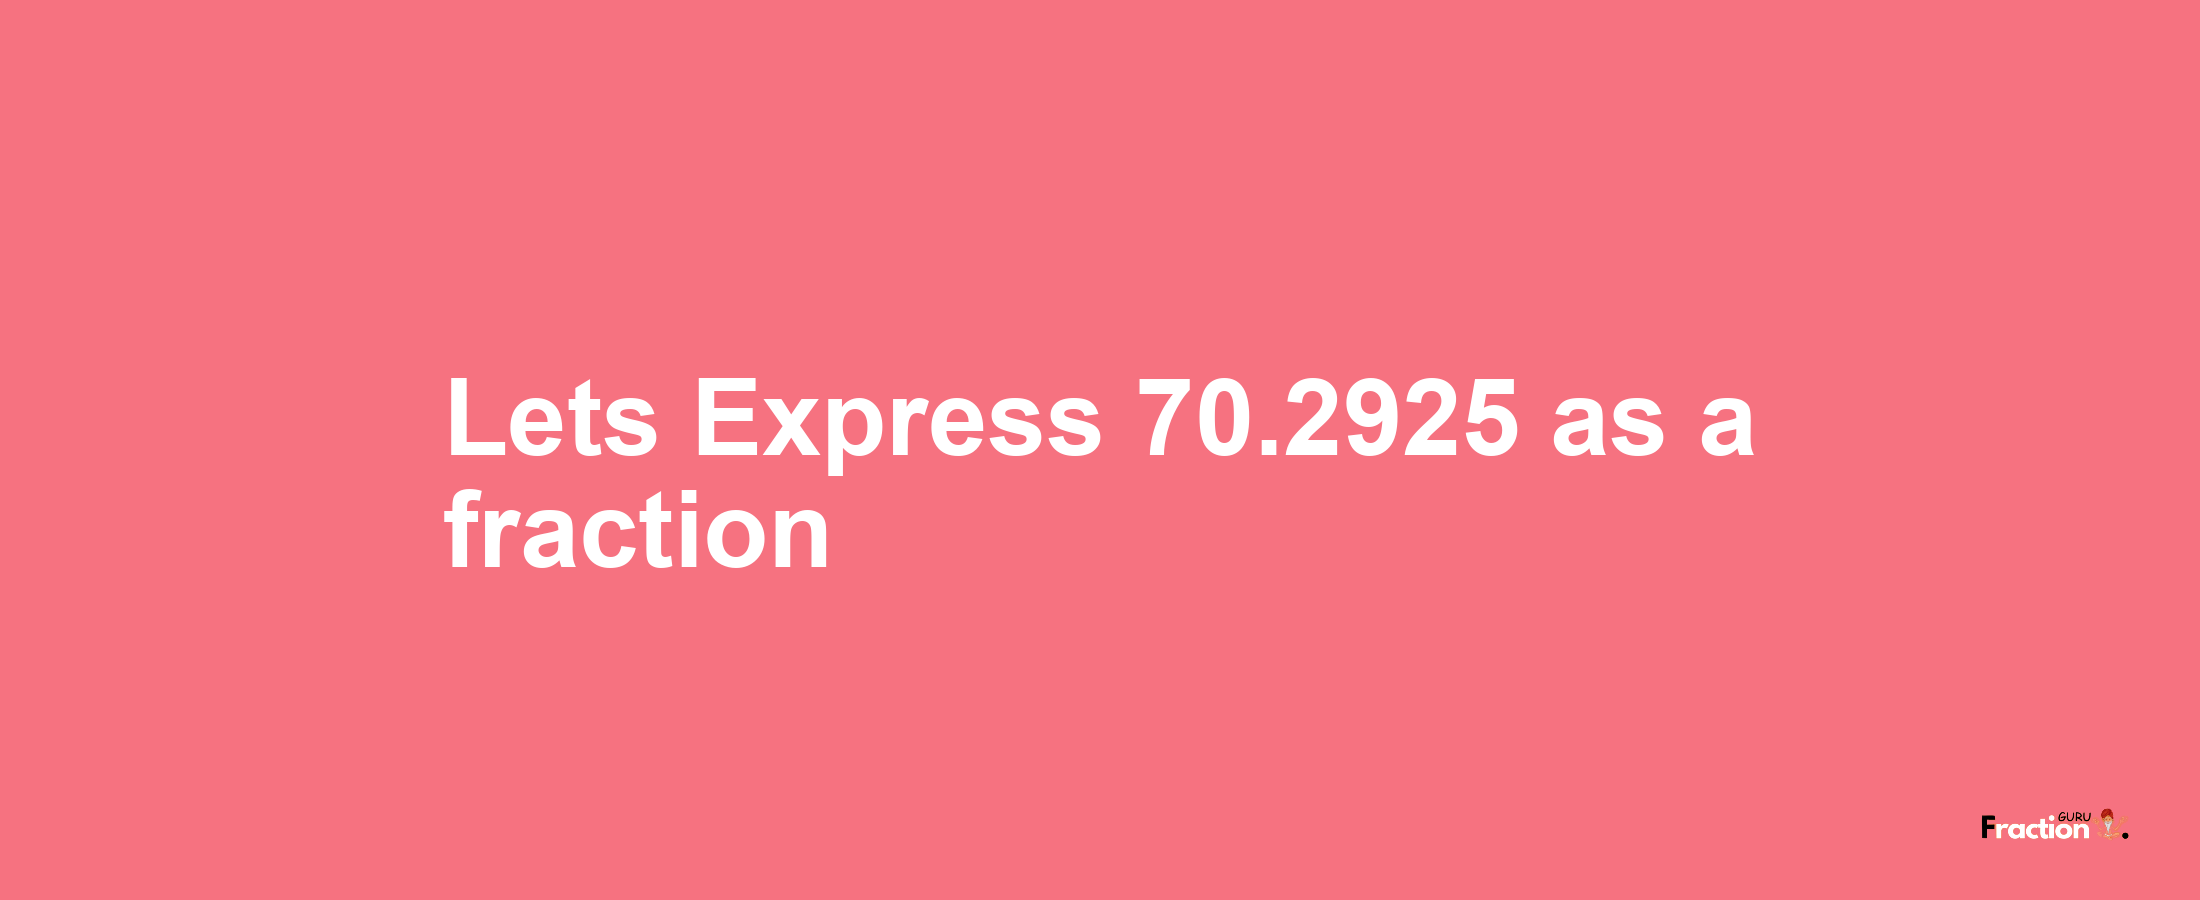 Lets Express 70.2925 as afraction